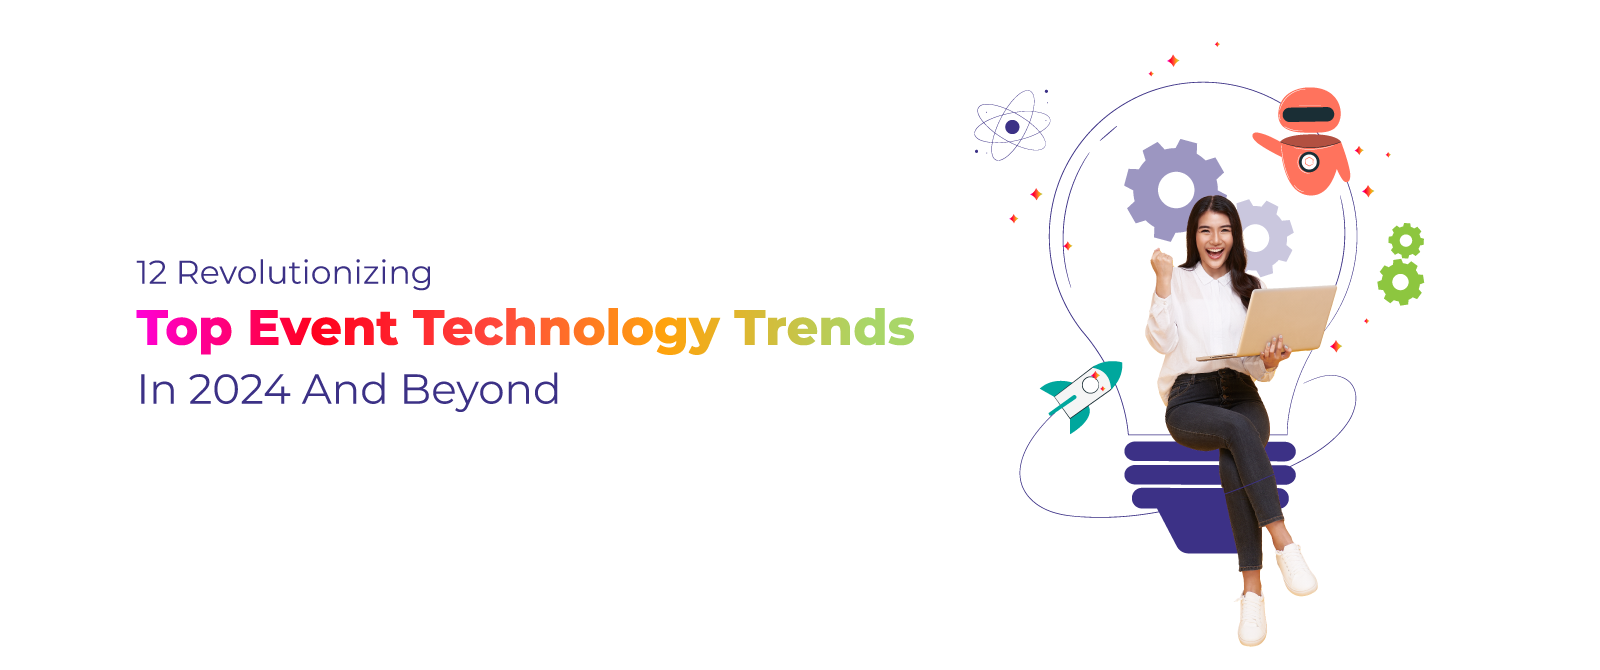 12 Revolutionizing Top Event Technology Trends in 2024 and Beyond